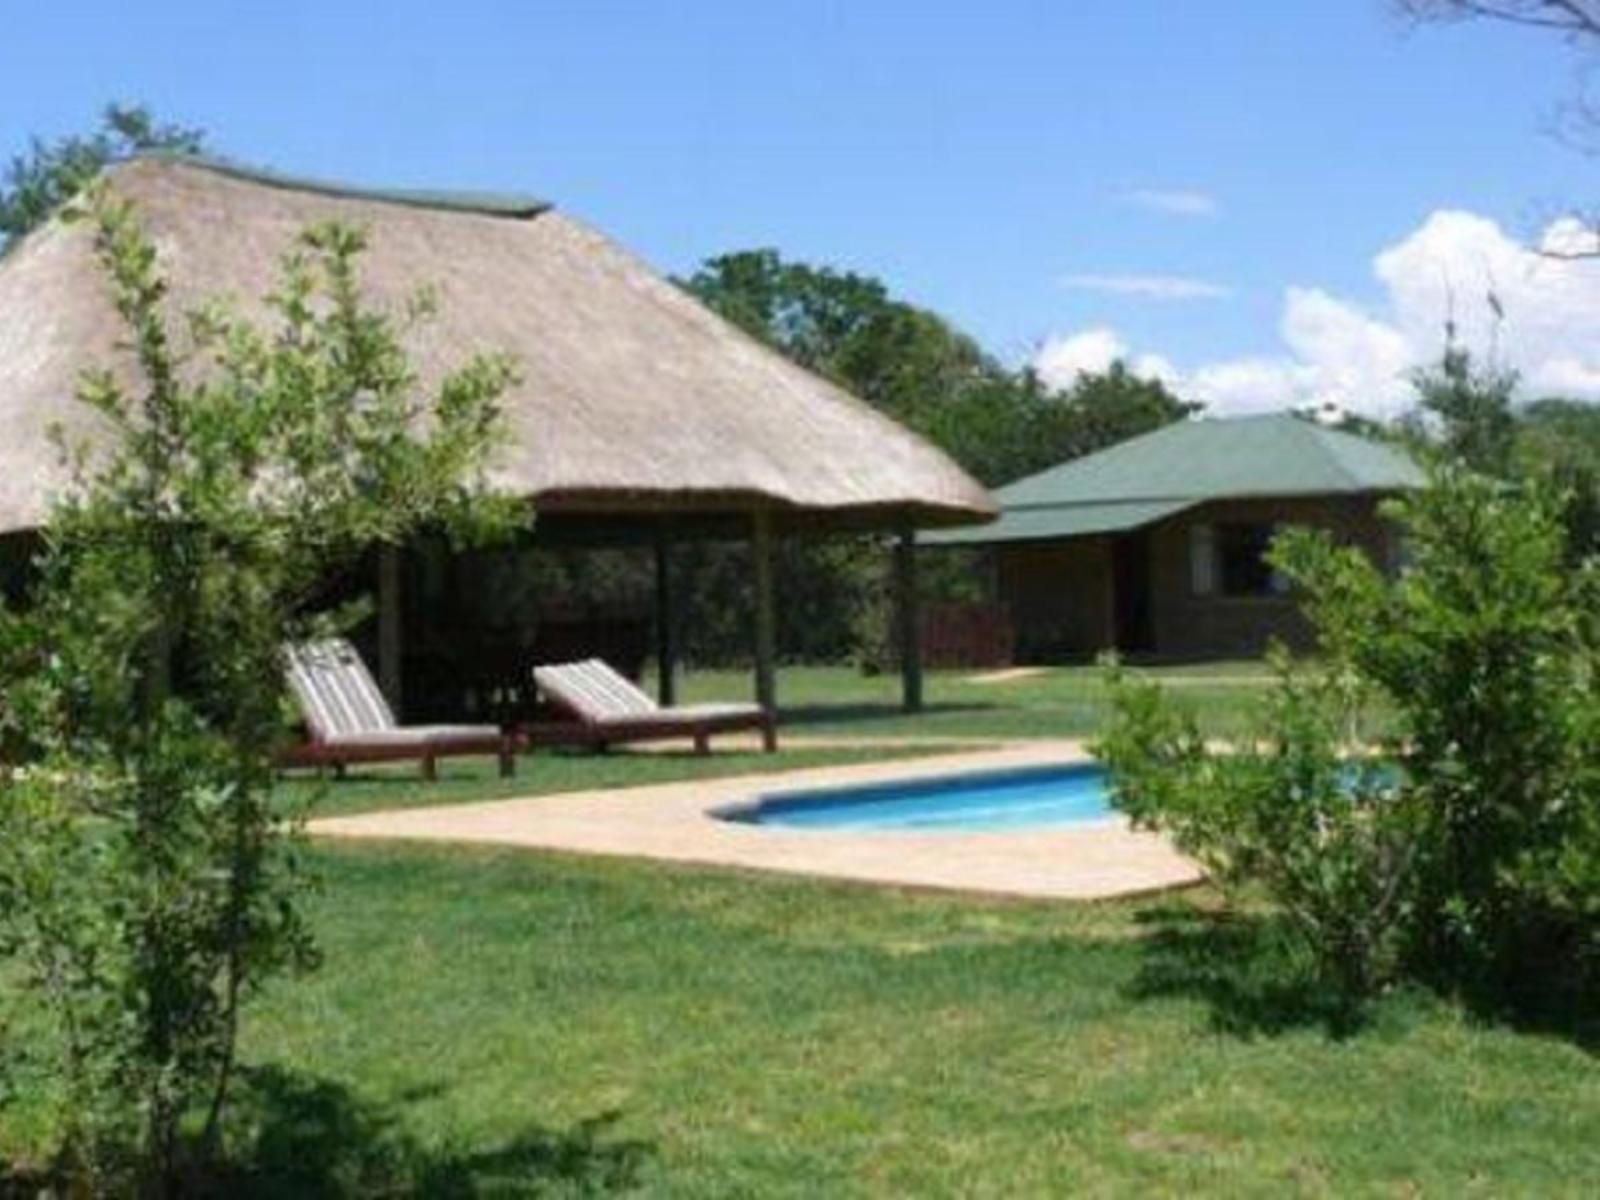 Riverbend Self Catering Cottages Magaliesburg Gauteng South Africa Complementary Colors, Swimming Pool